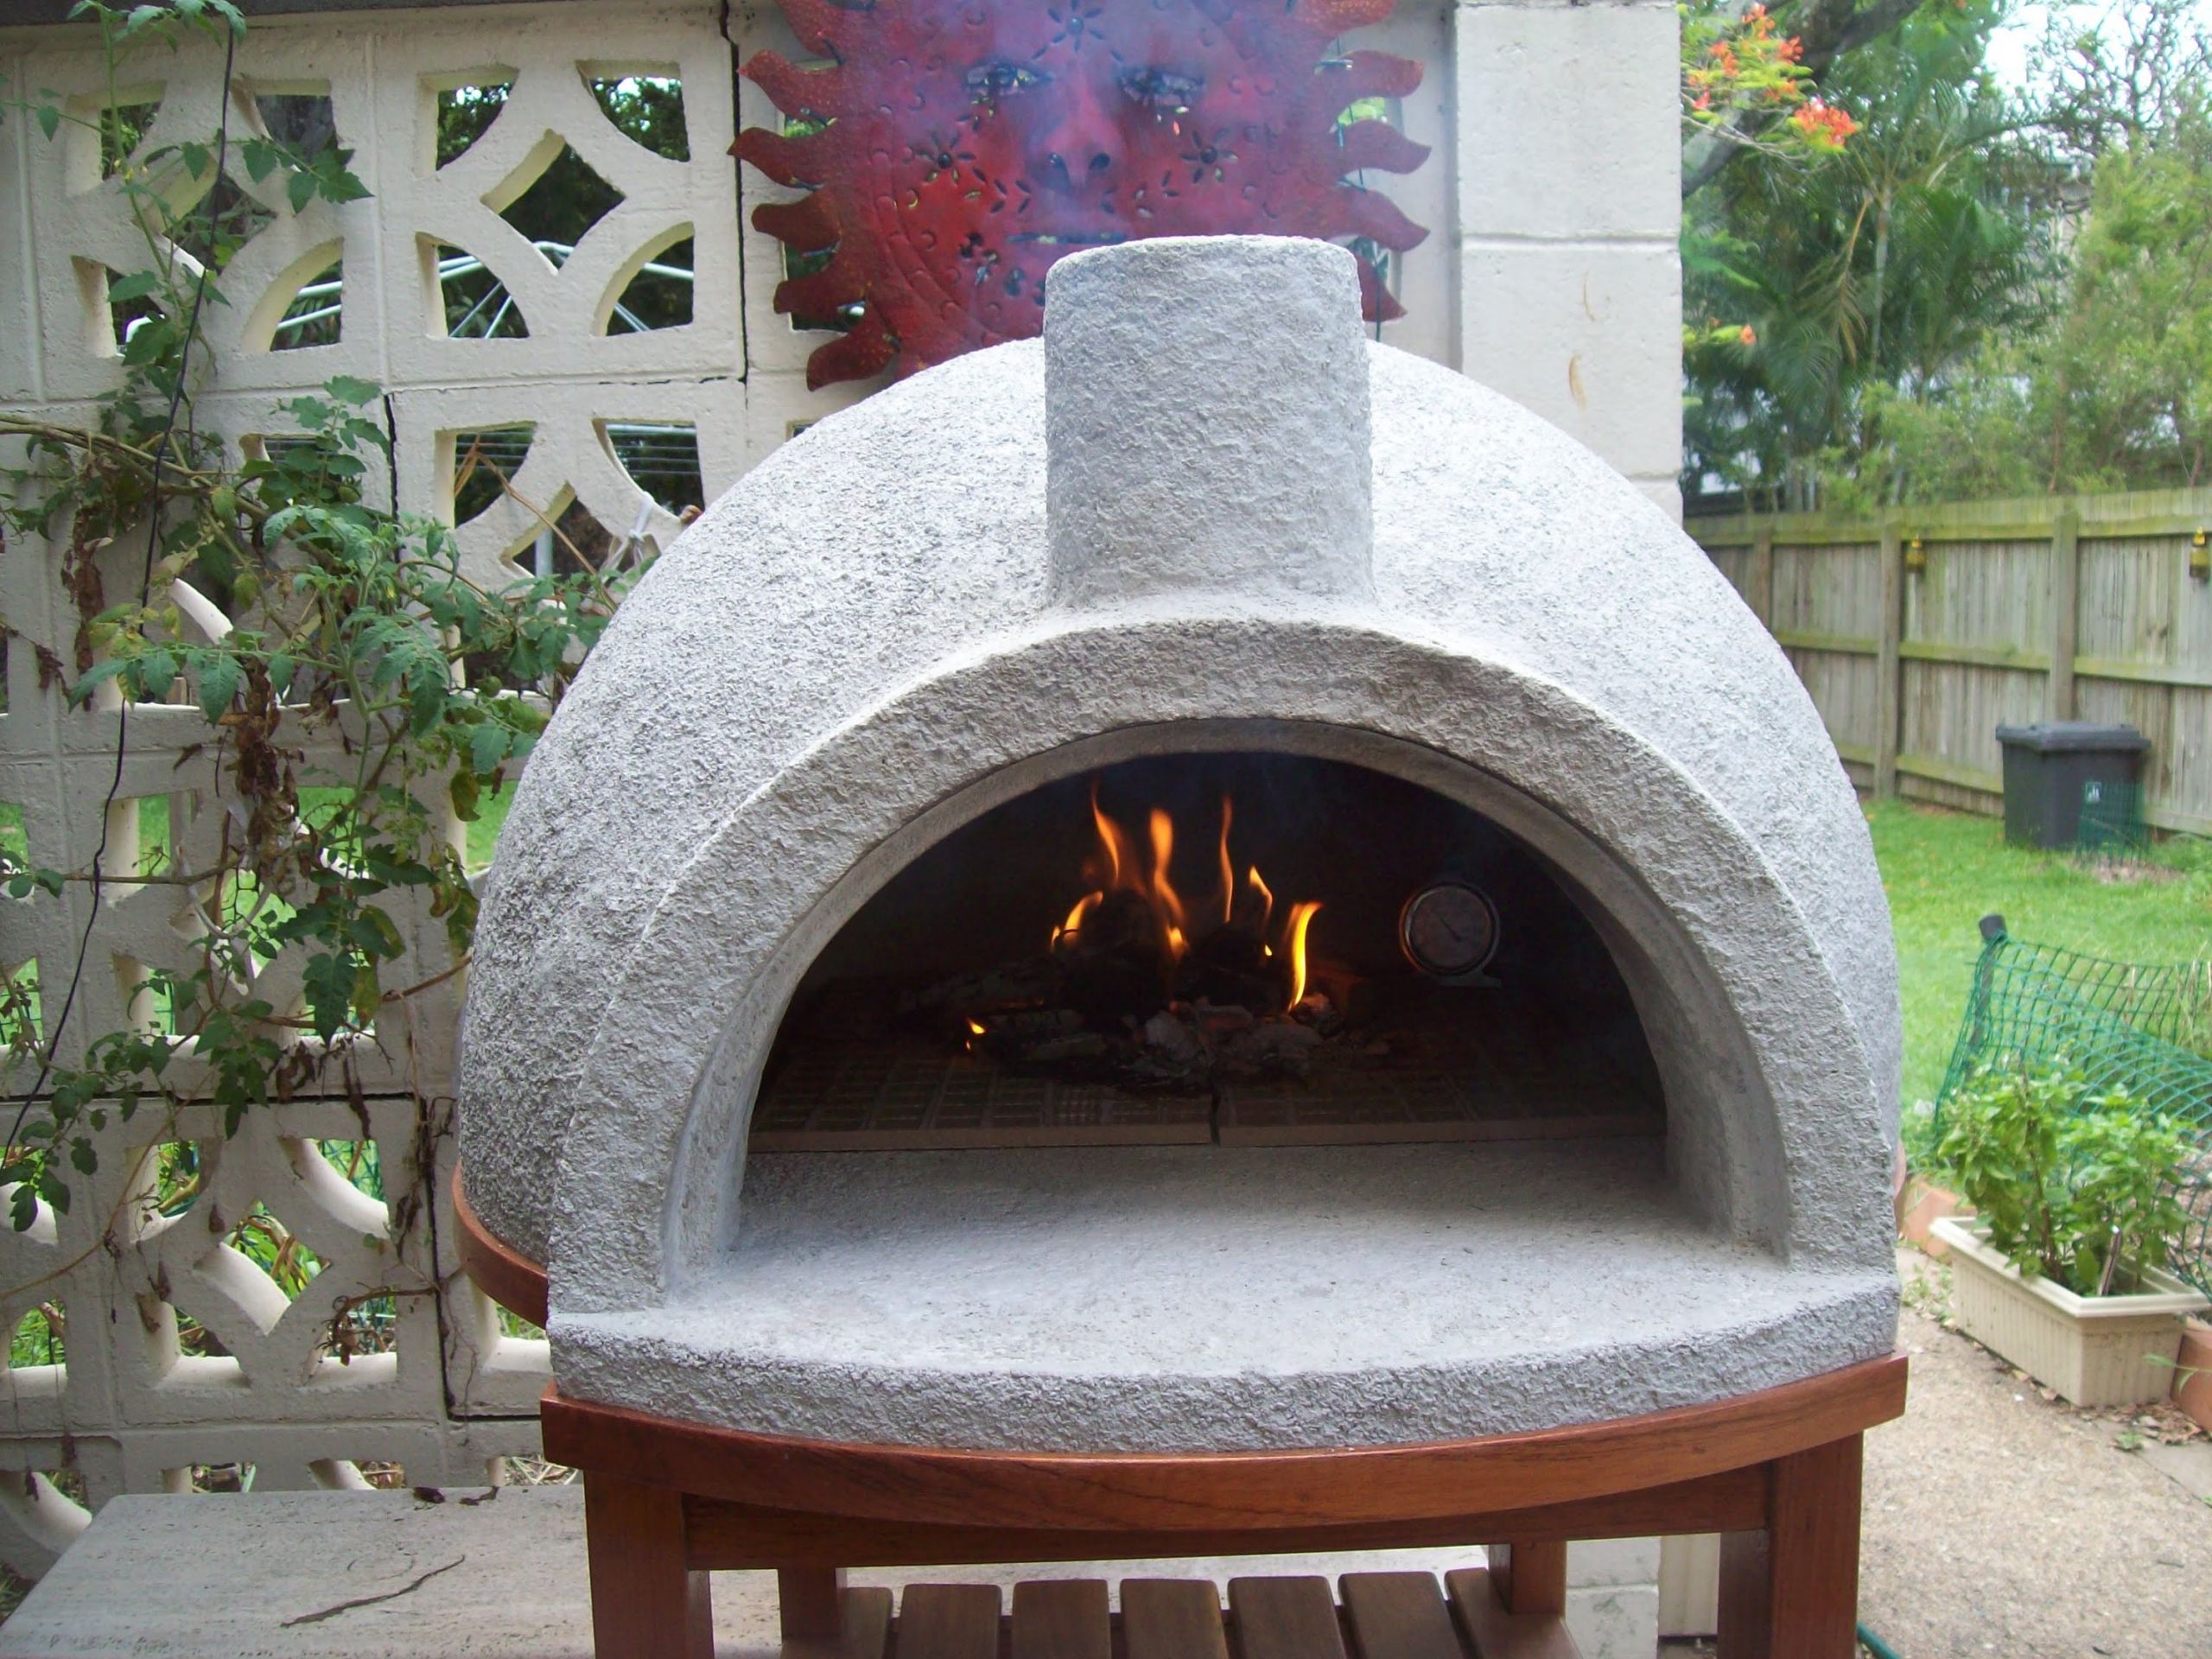 DIY Pizza Ovens Plans
 vermiculite pizza oven